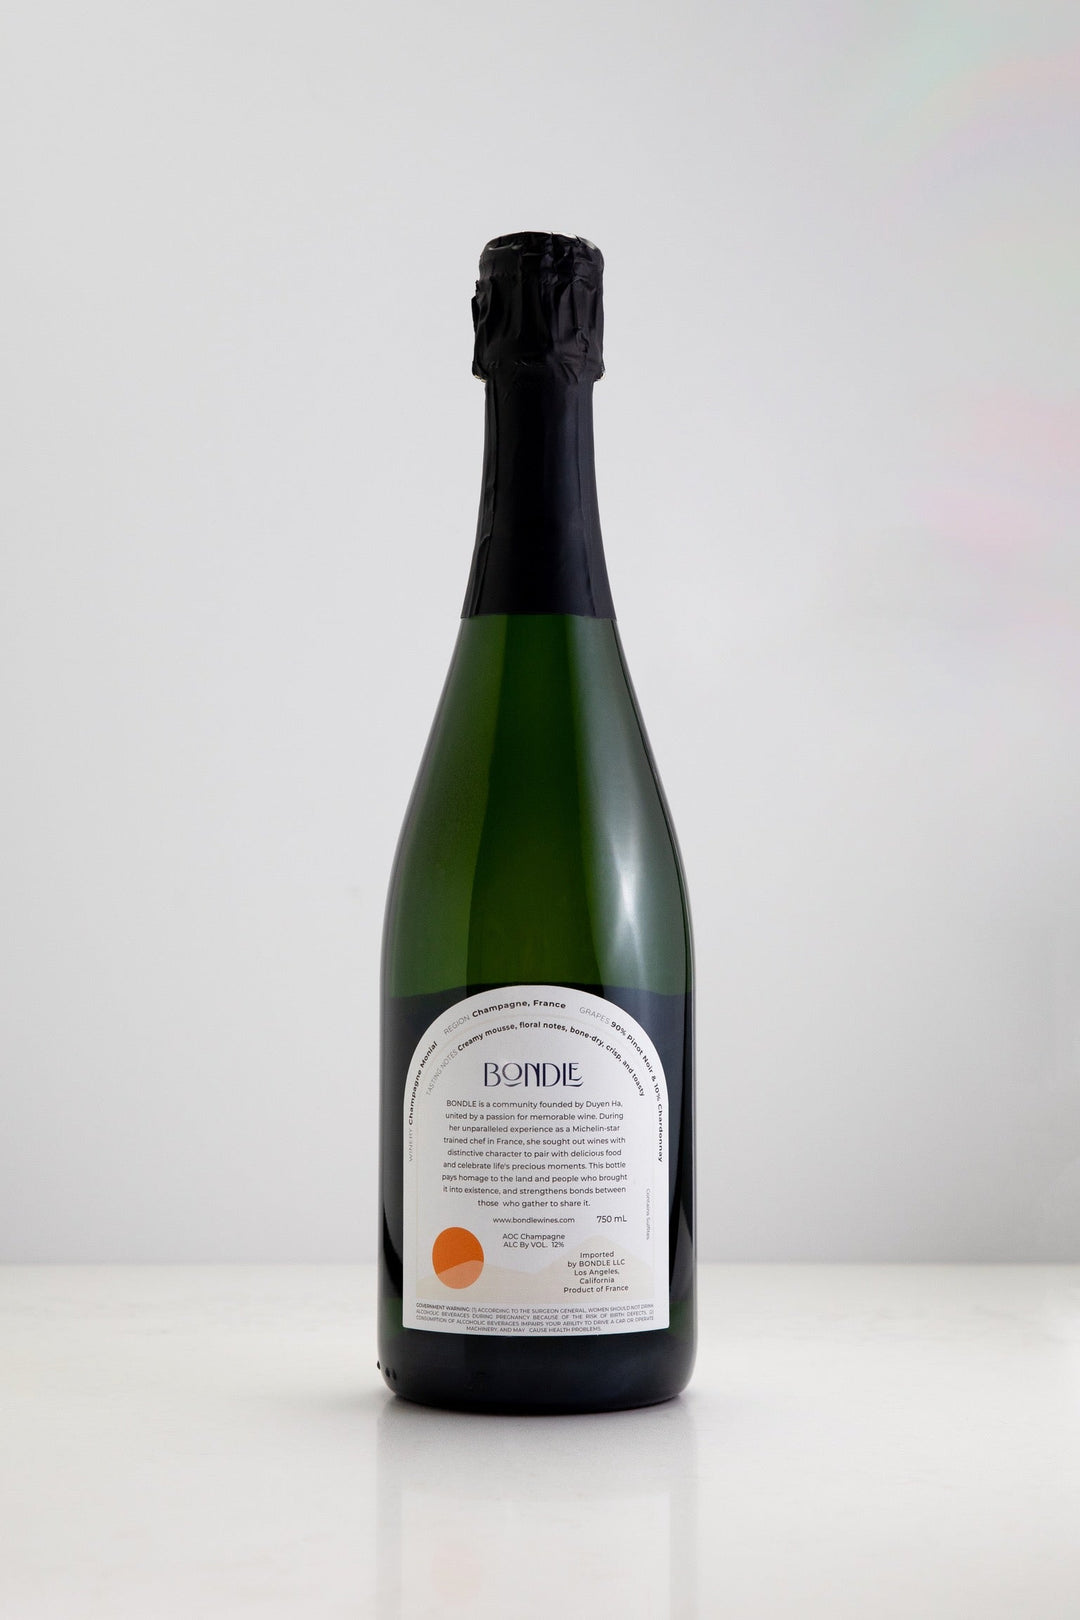 Case of NV Champagne Brut Nature by Monial